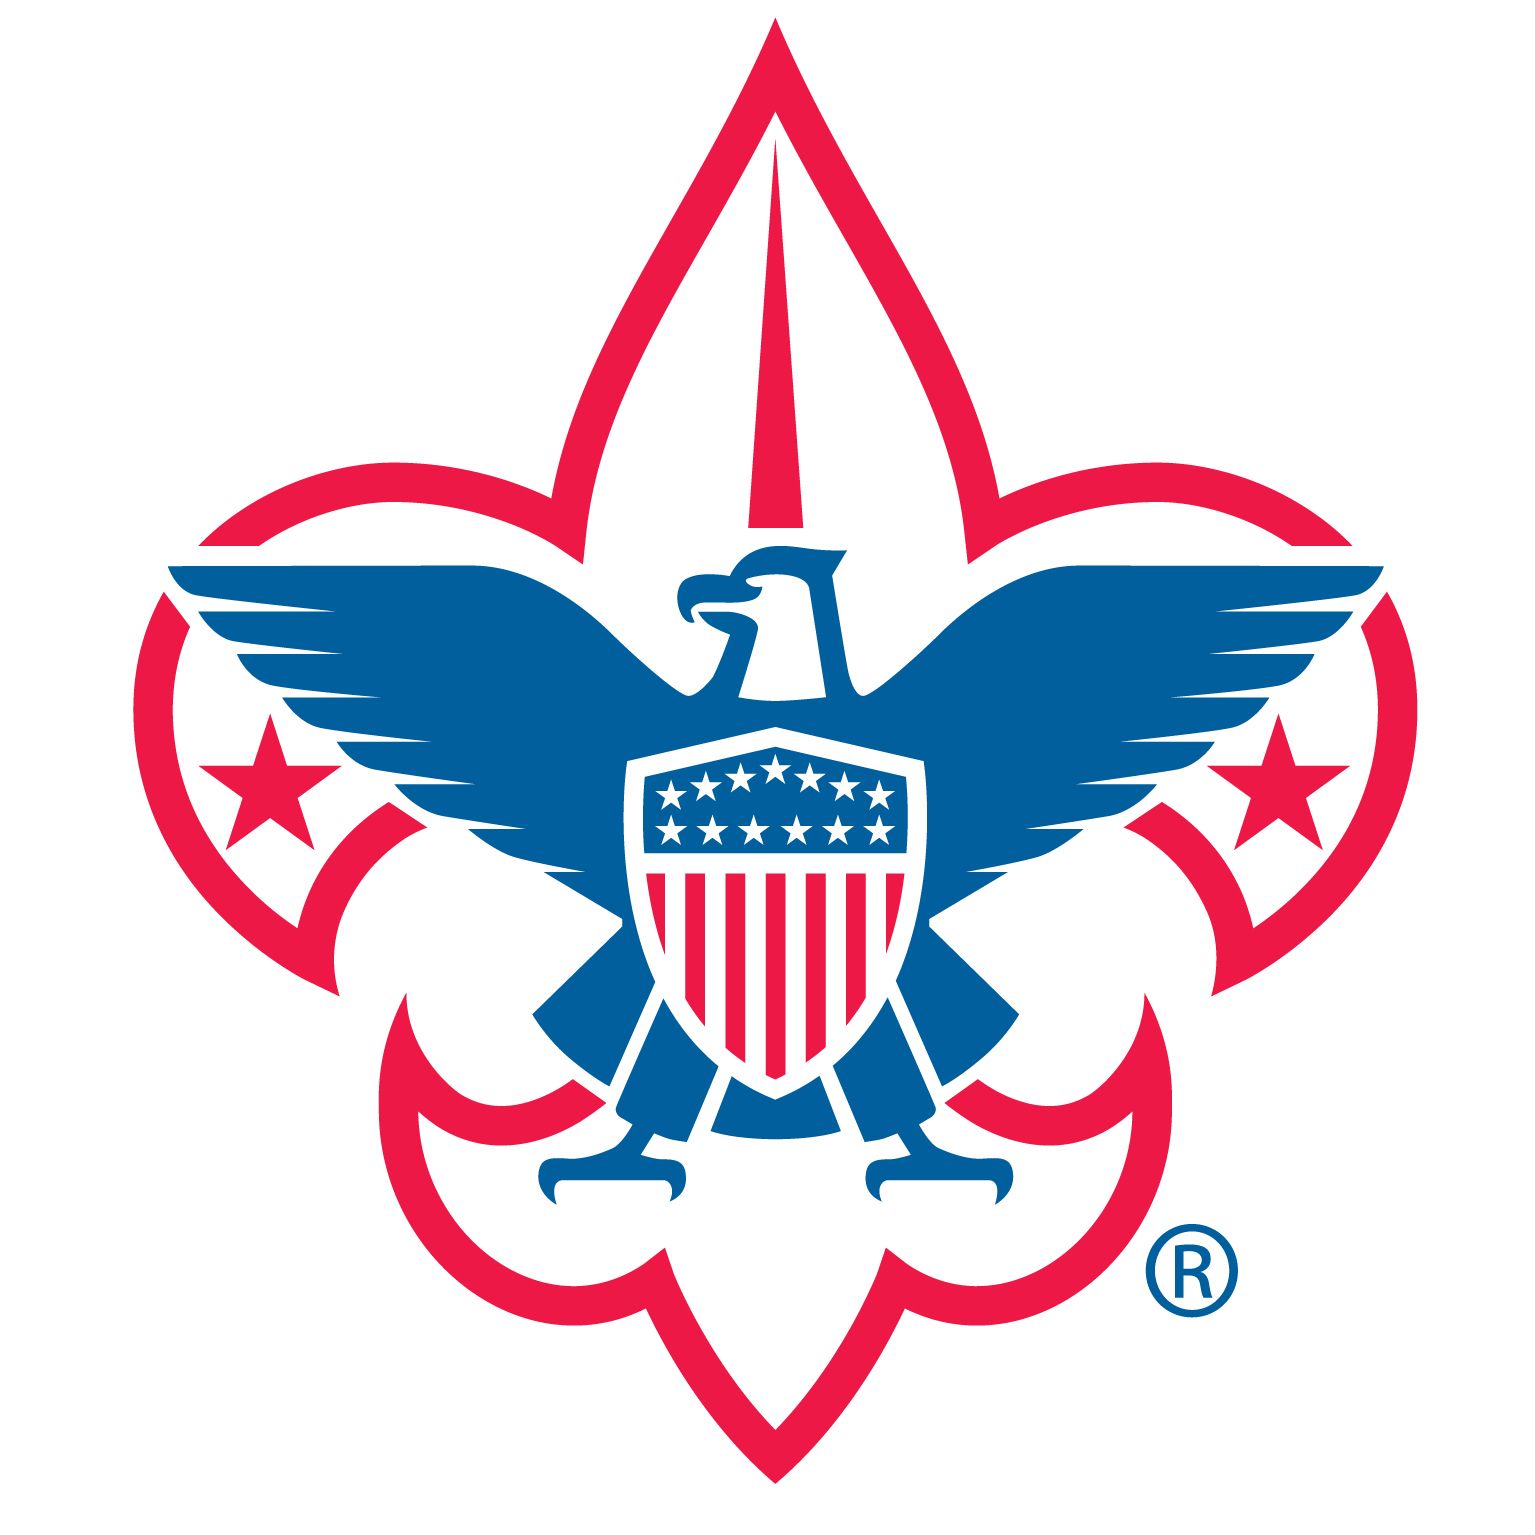 Politicizing The Scouts In A Speech Was Wrong